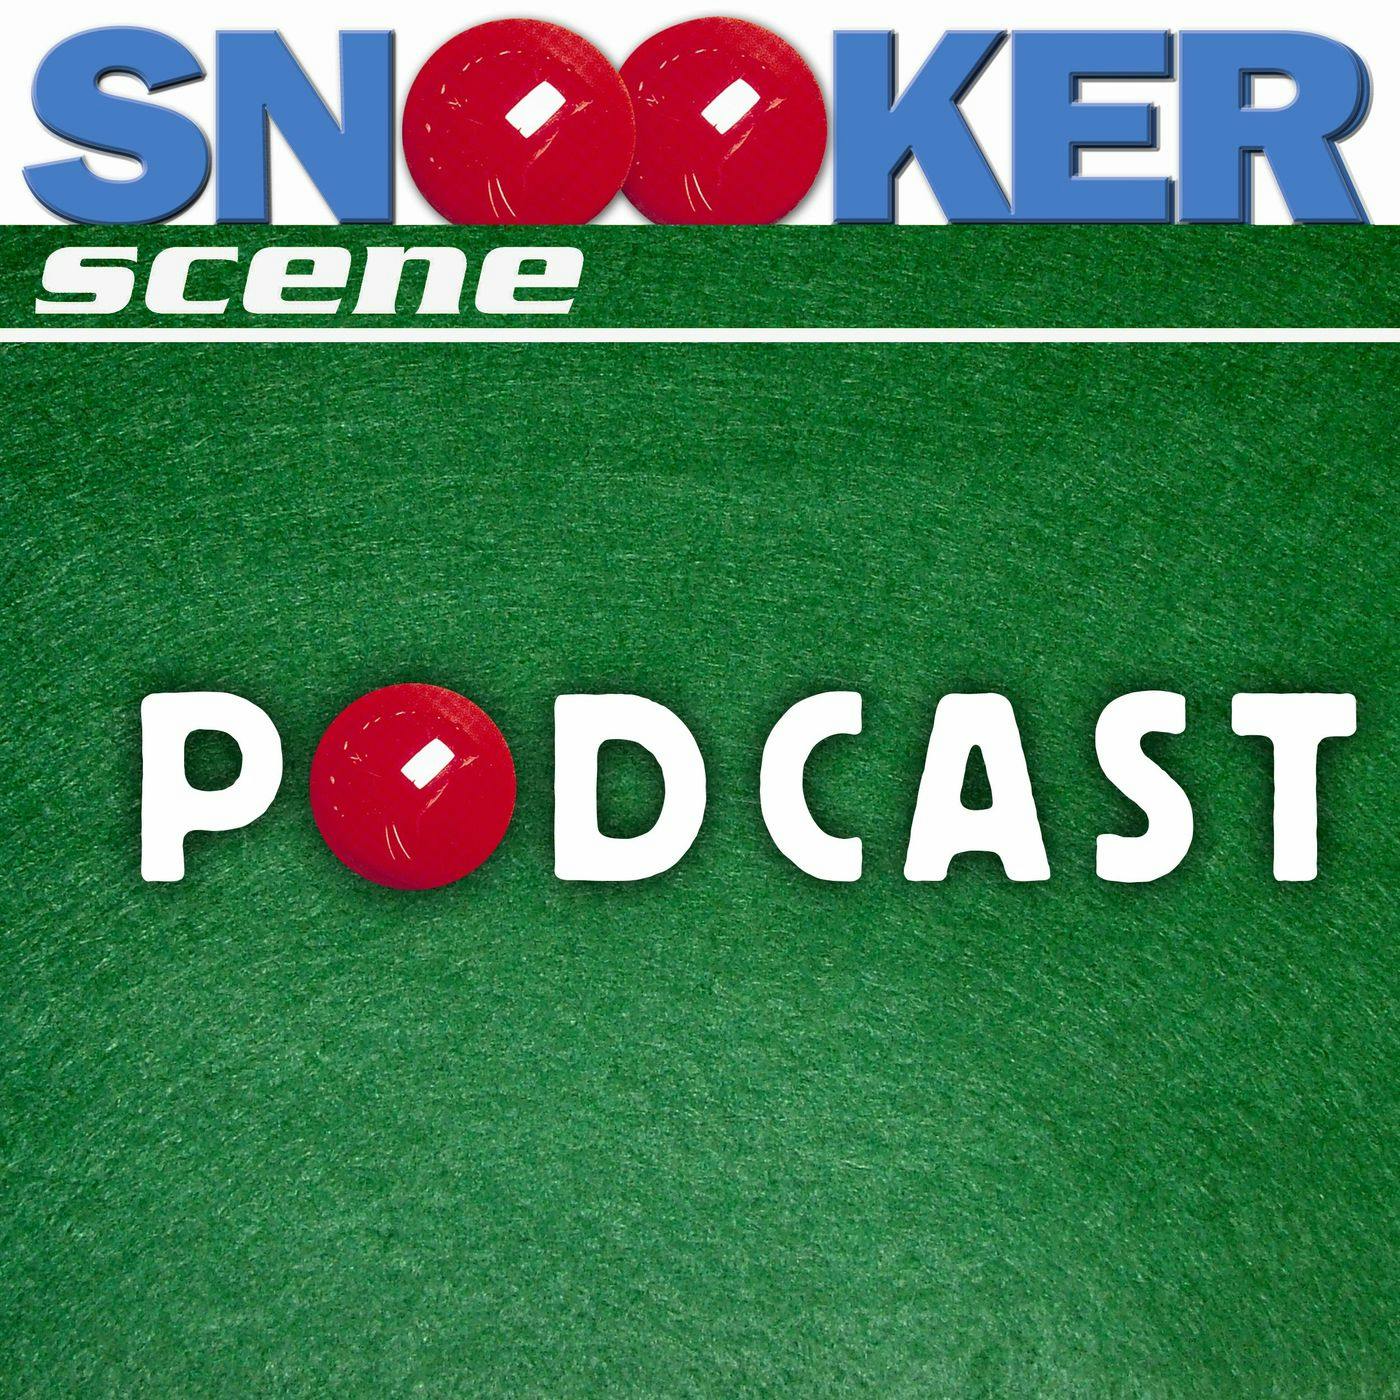 Snooker Scene Podcast episode 106 - Out of the Blue and Into the Black